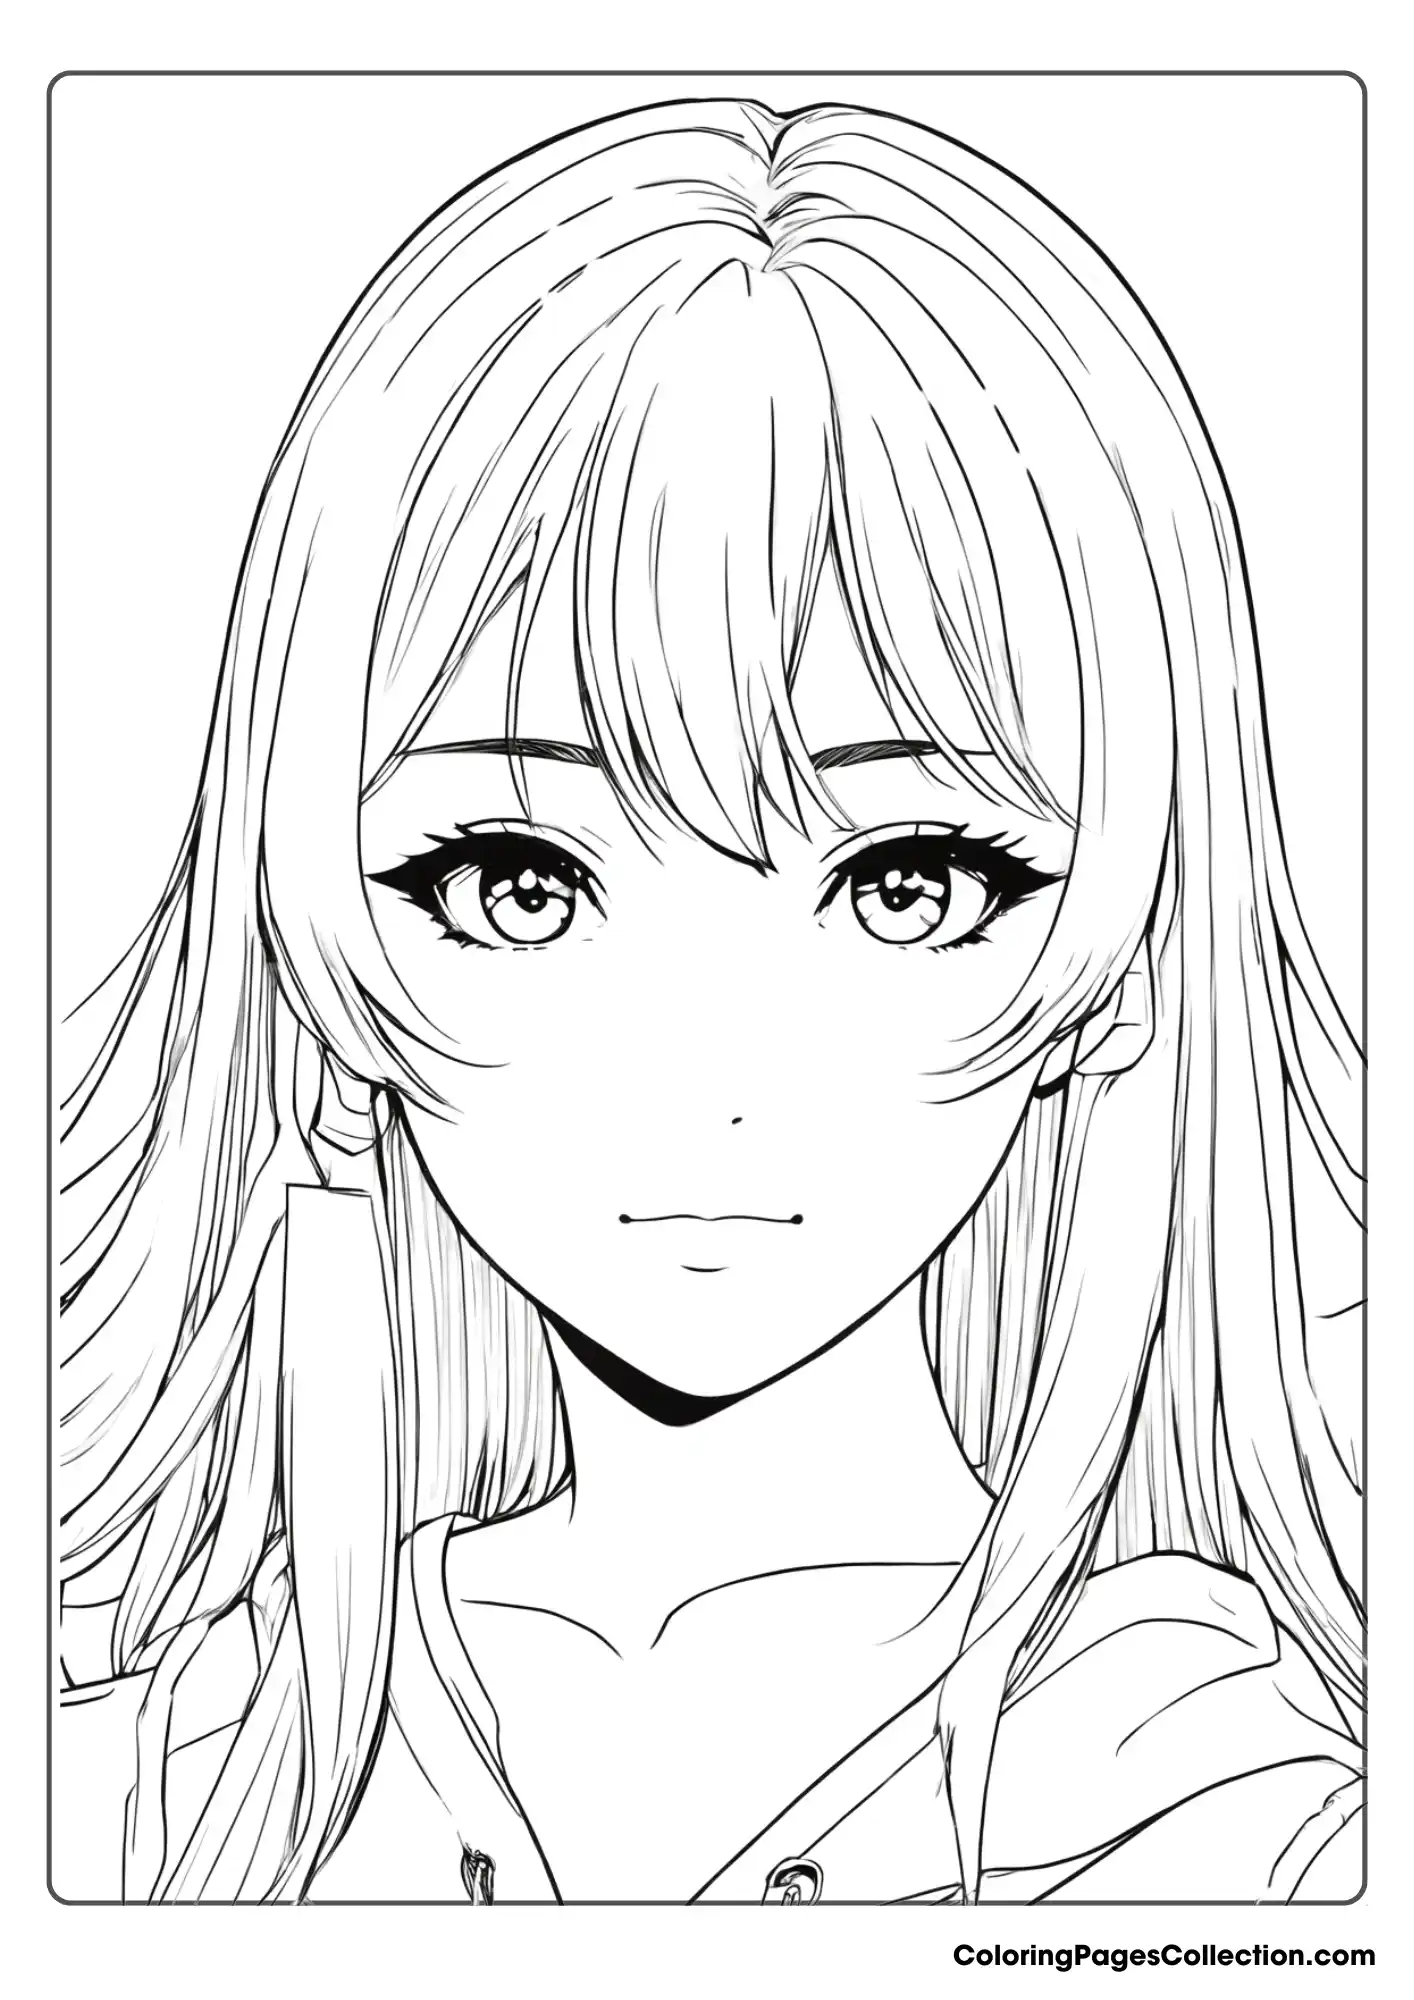 Coloring pages for teens, Anime Girl Coloring Page